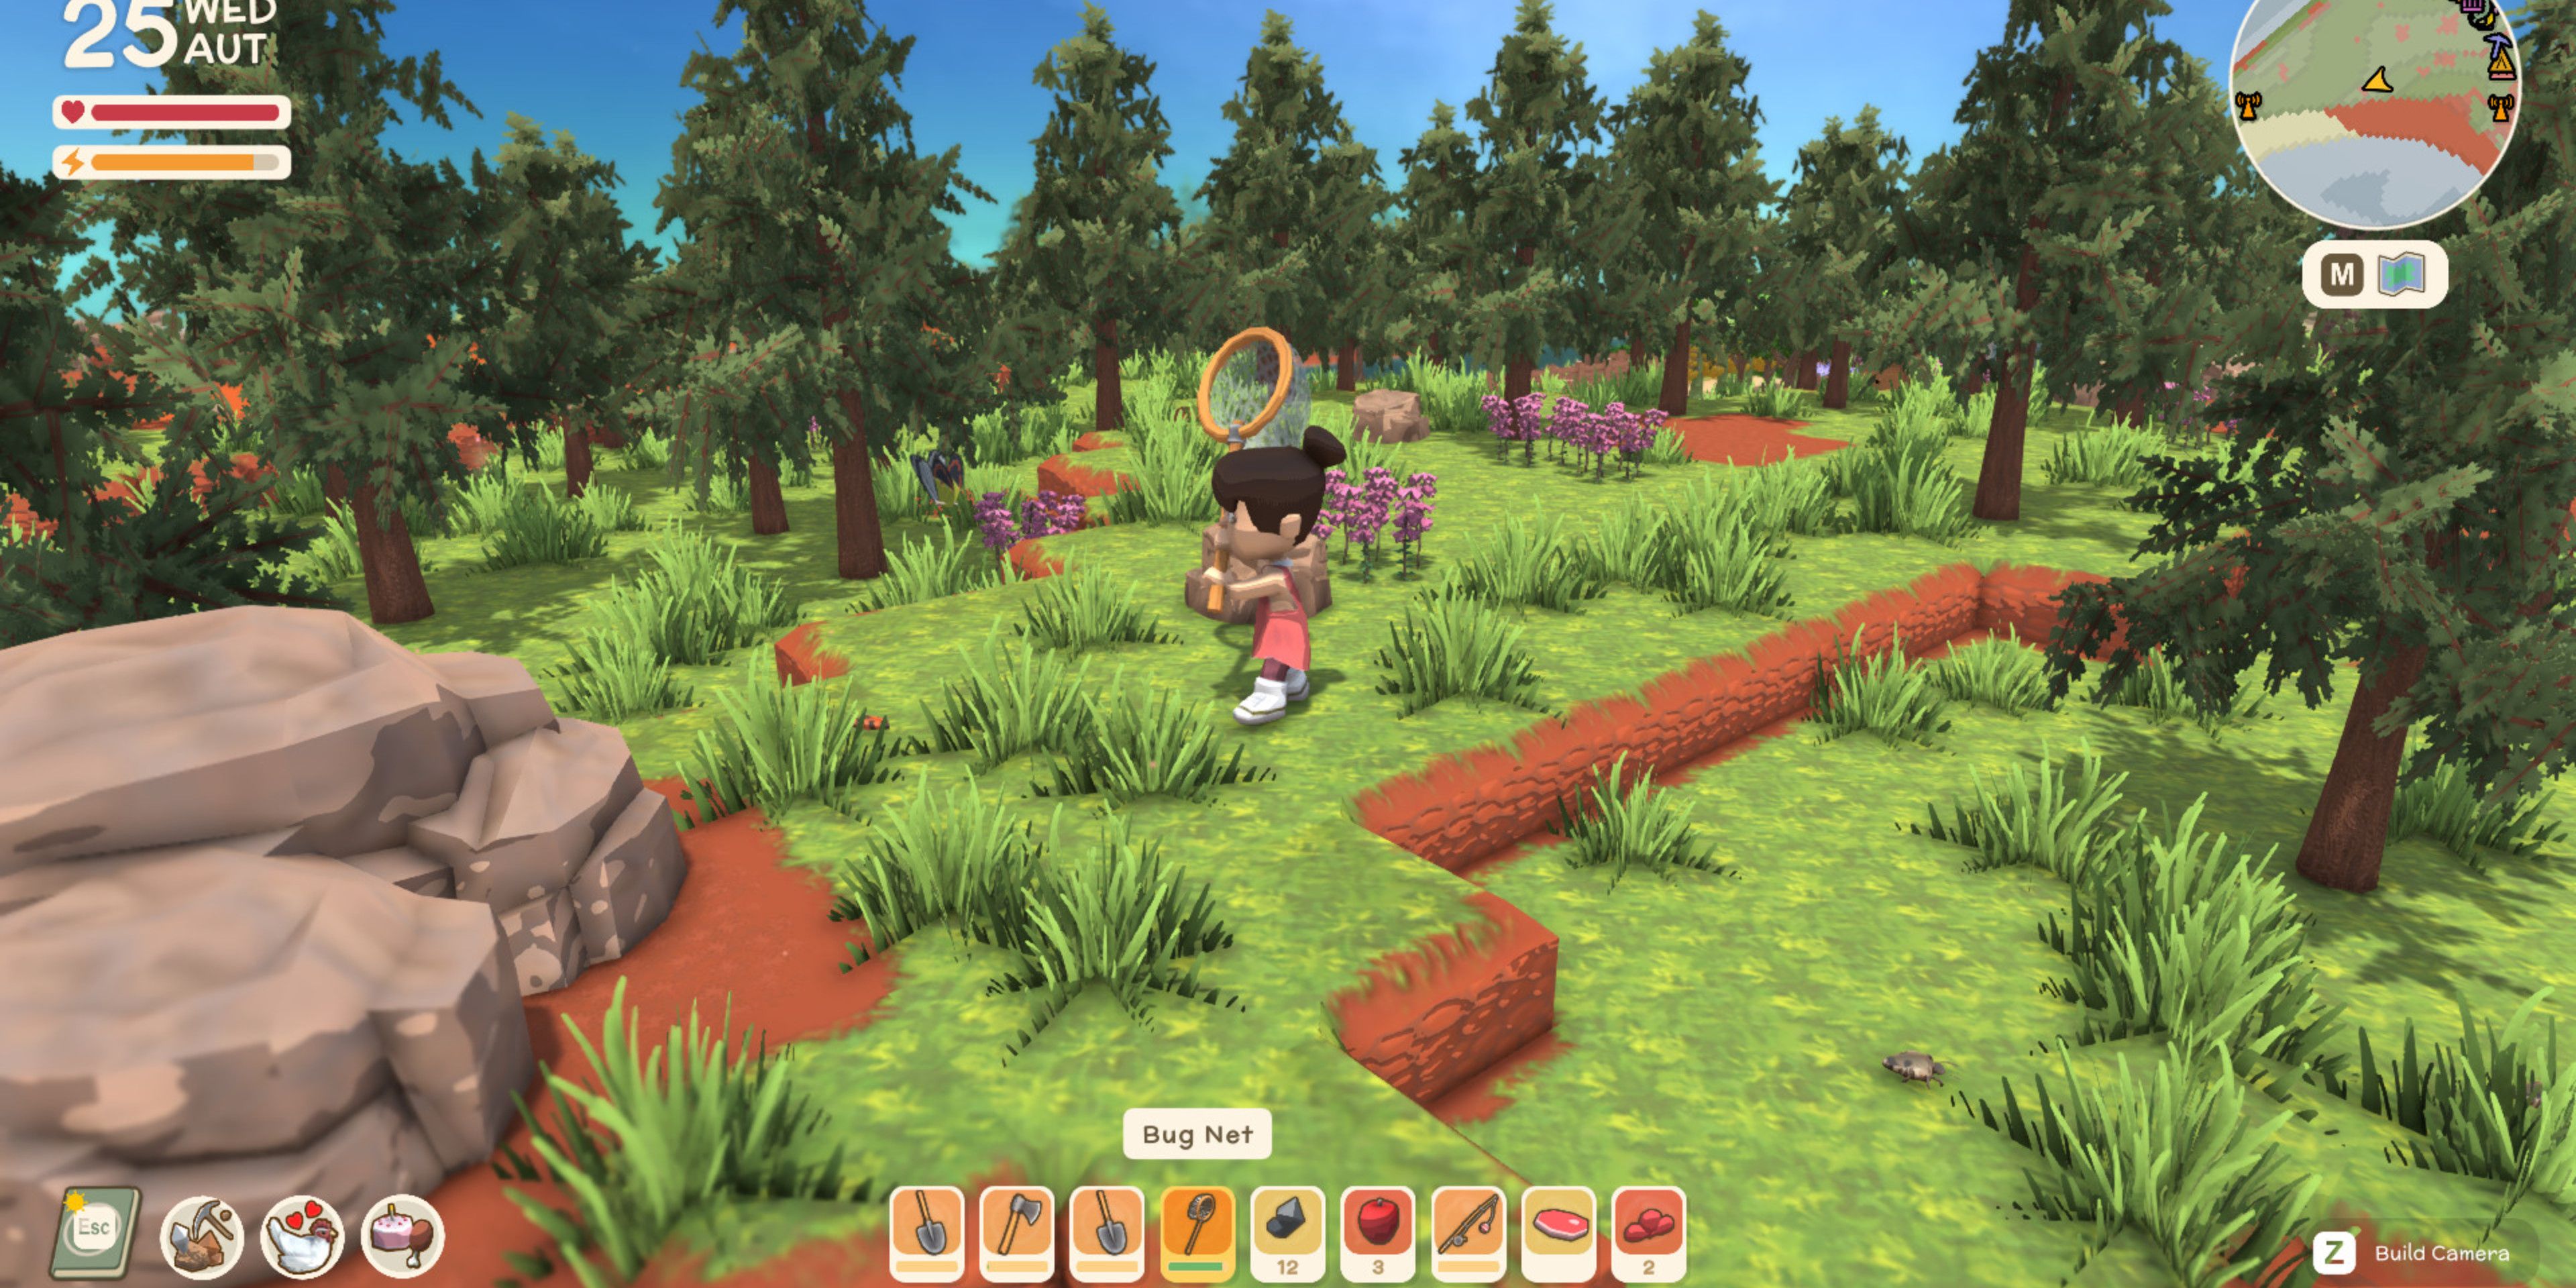 player hunting for bugs in one of Dinkum's four biomes